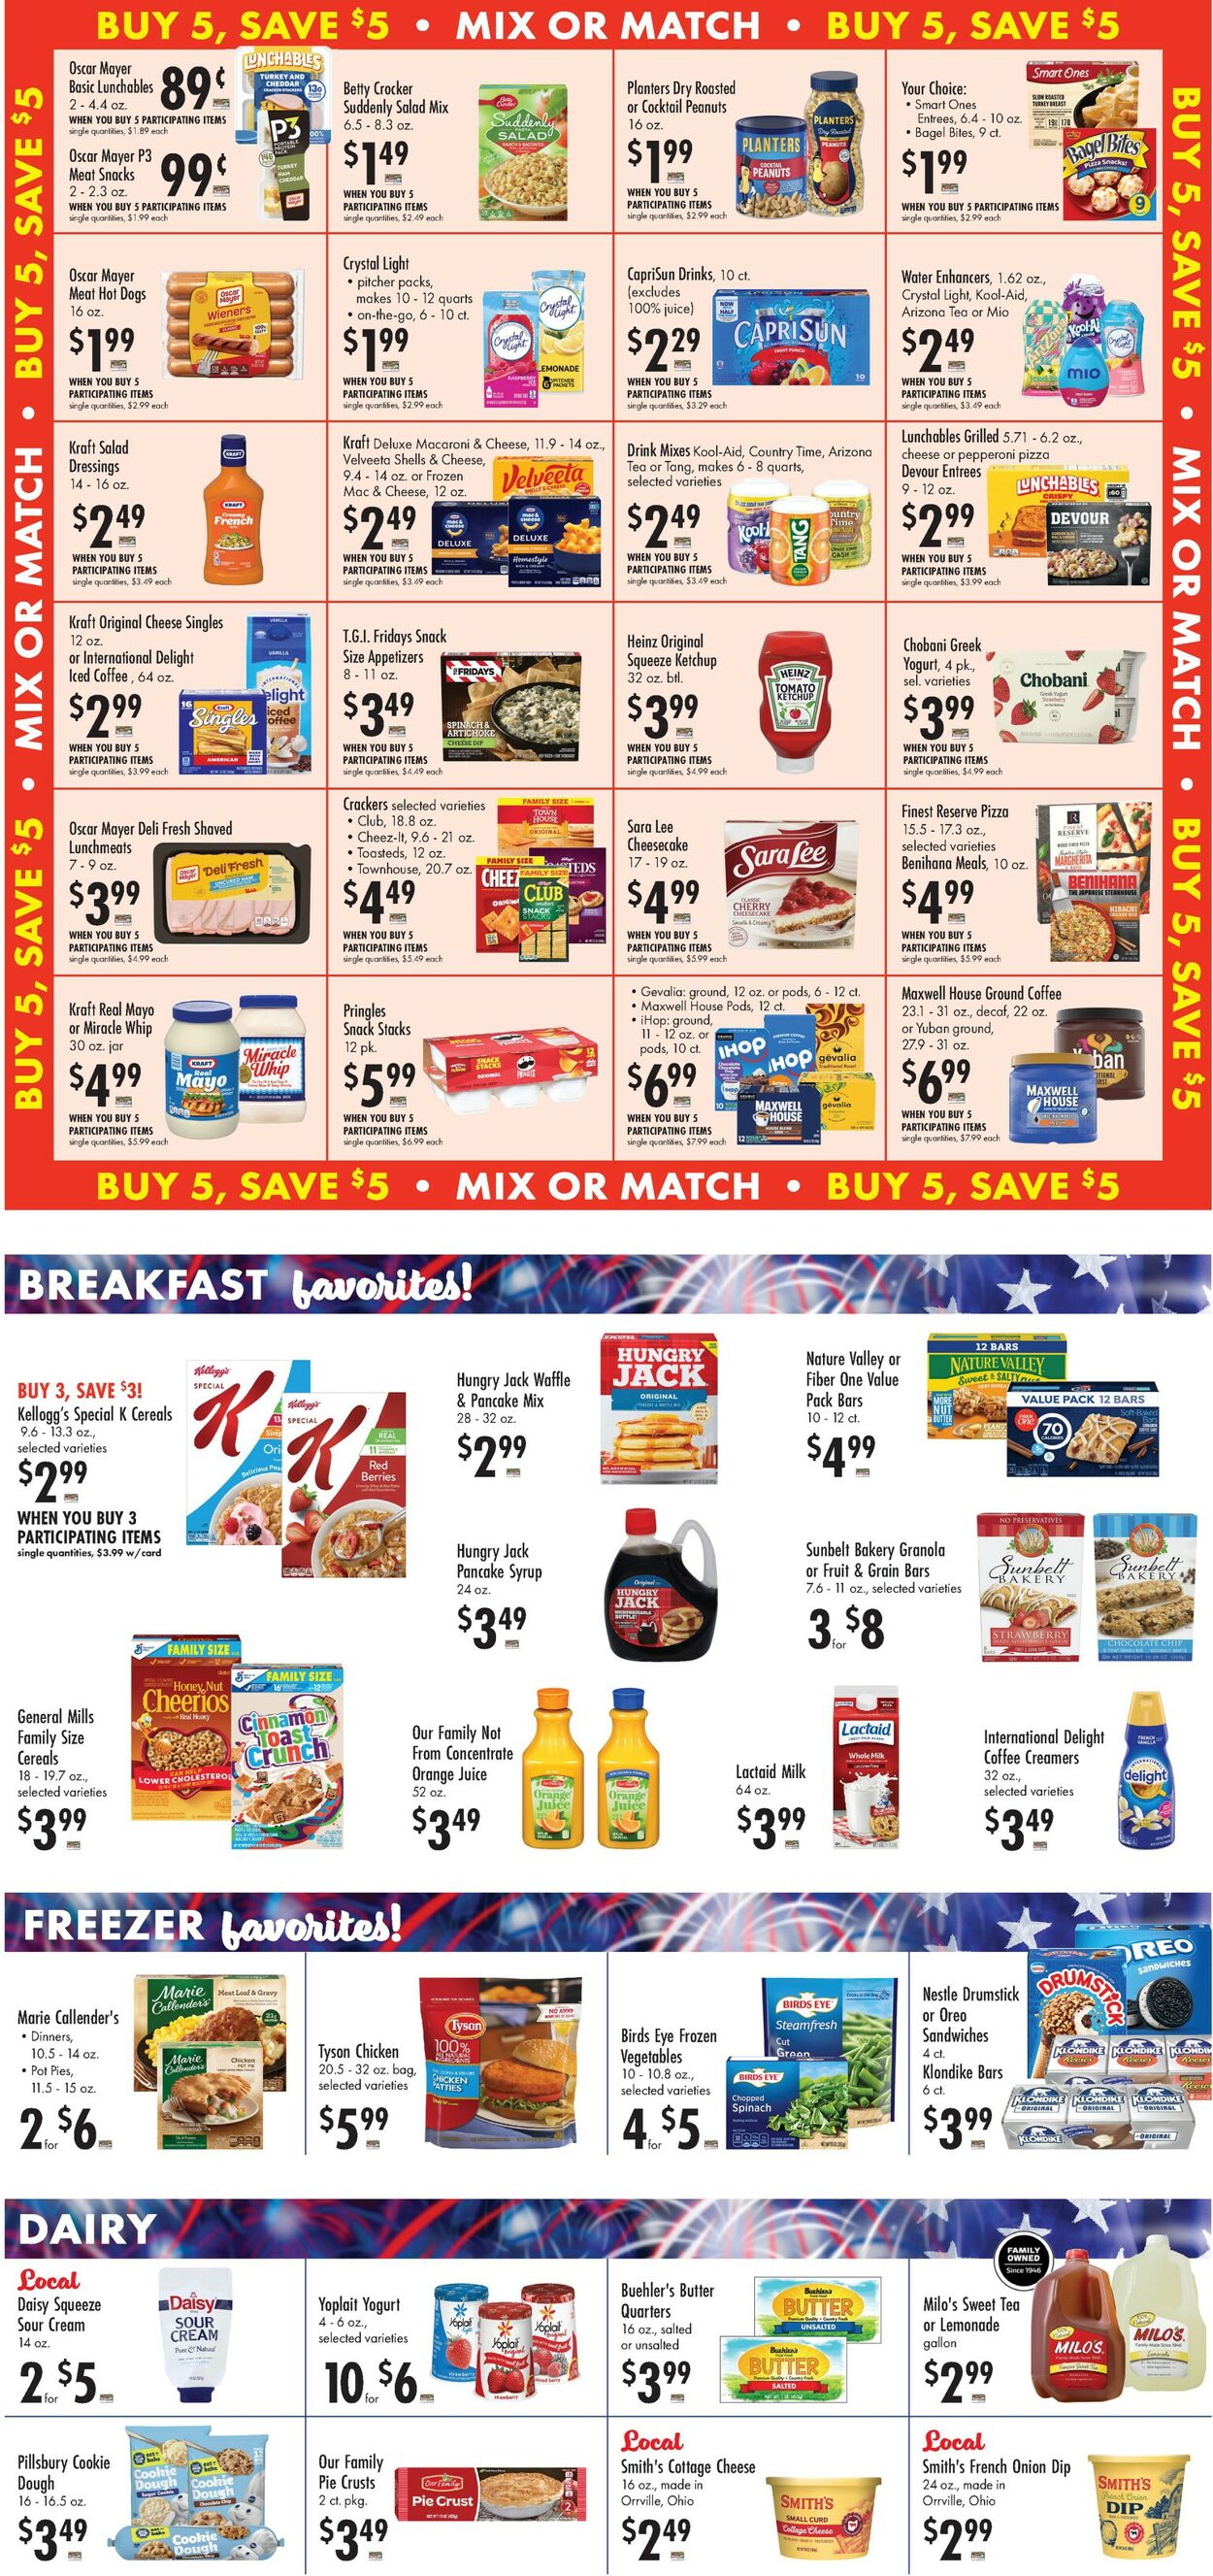 Catalogue Buehler's Fresh Foods from 07/03/2024